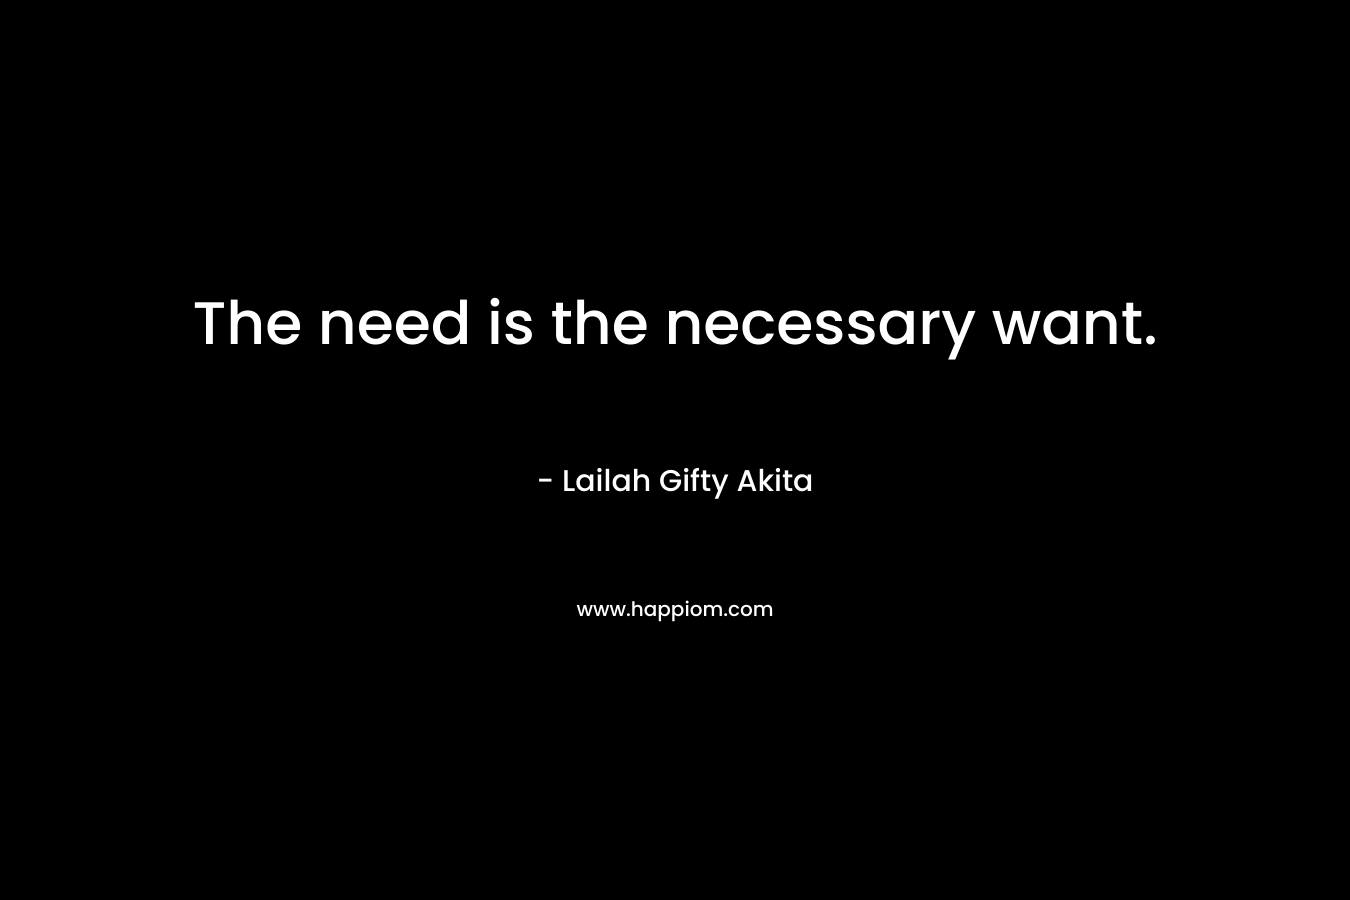 The need is the necessary want.